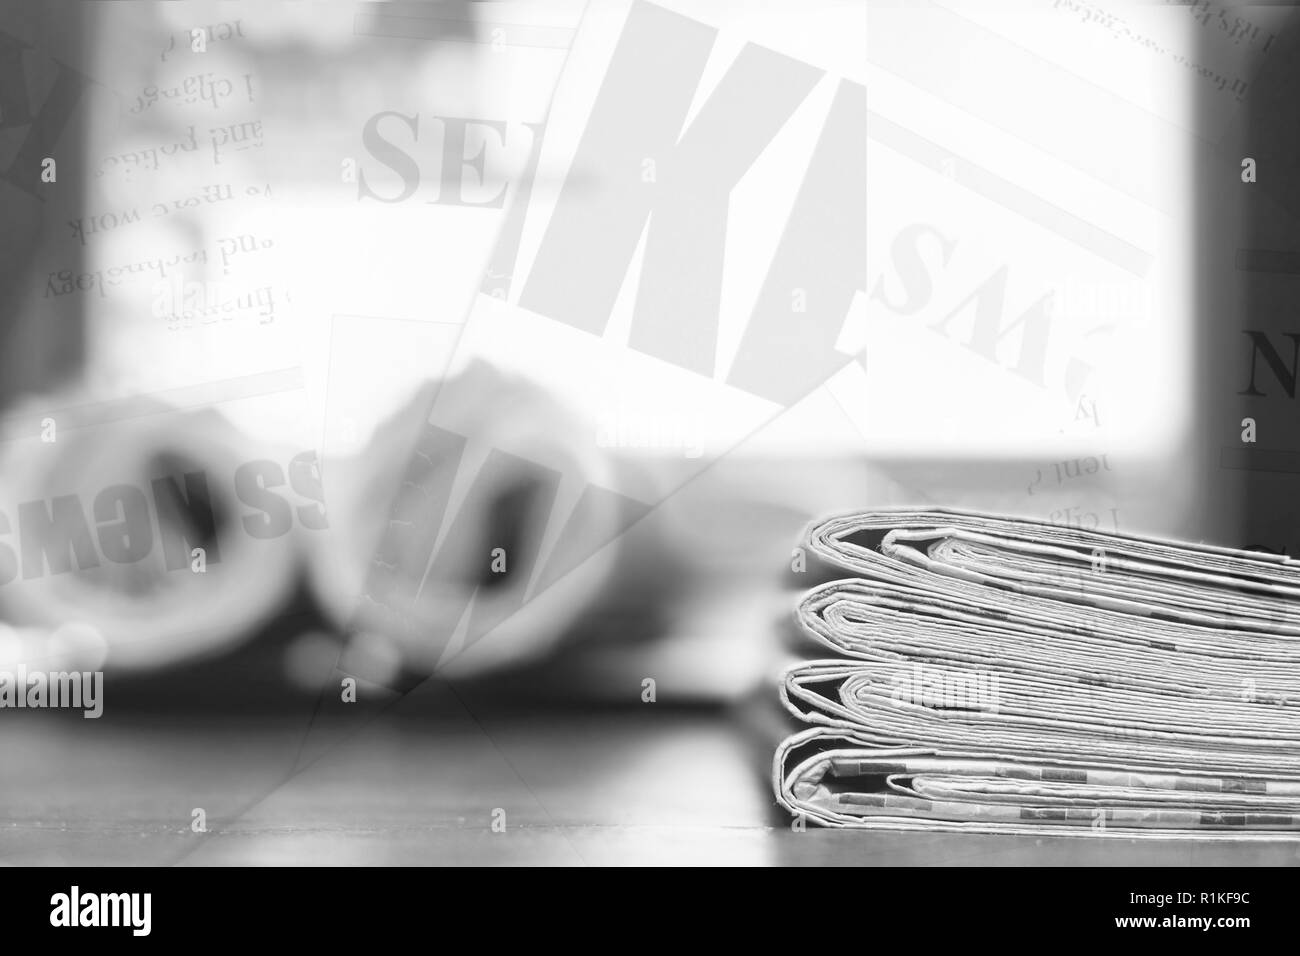 Newspaper background. Pile of papers with news and blurred screen of laptop, partially shown words, headlines and articles as overlay texture Stock Photo